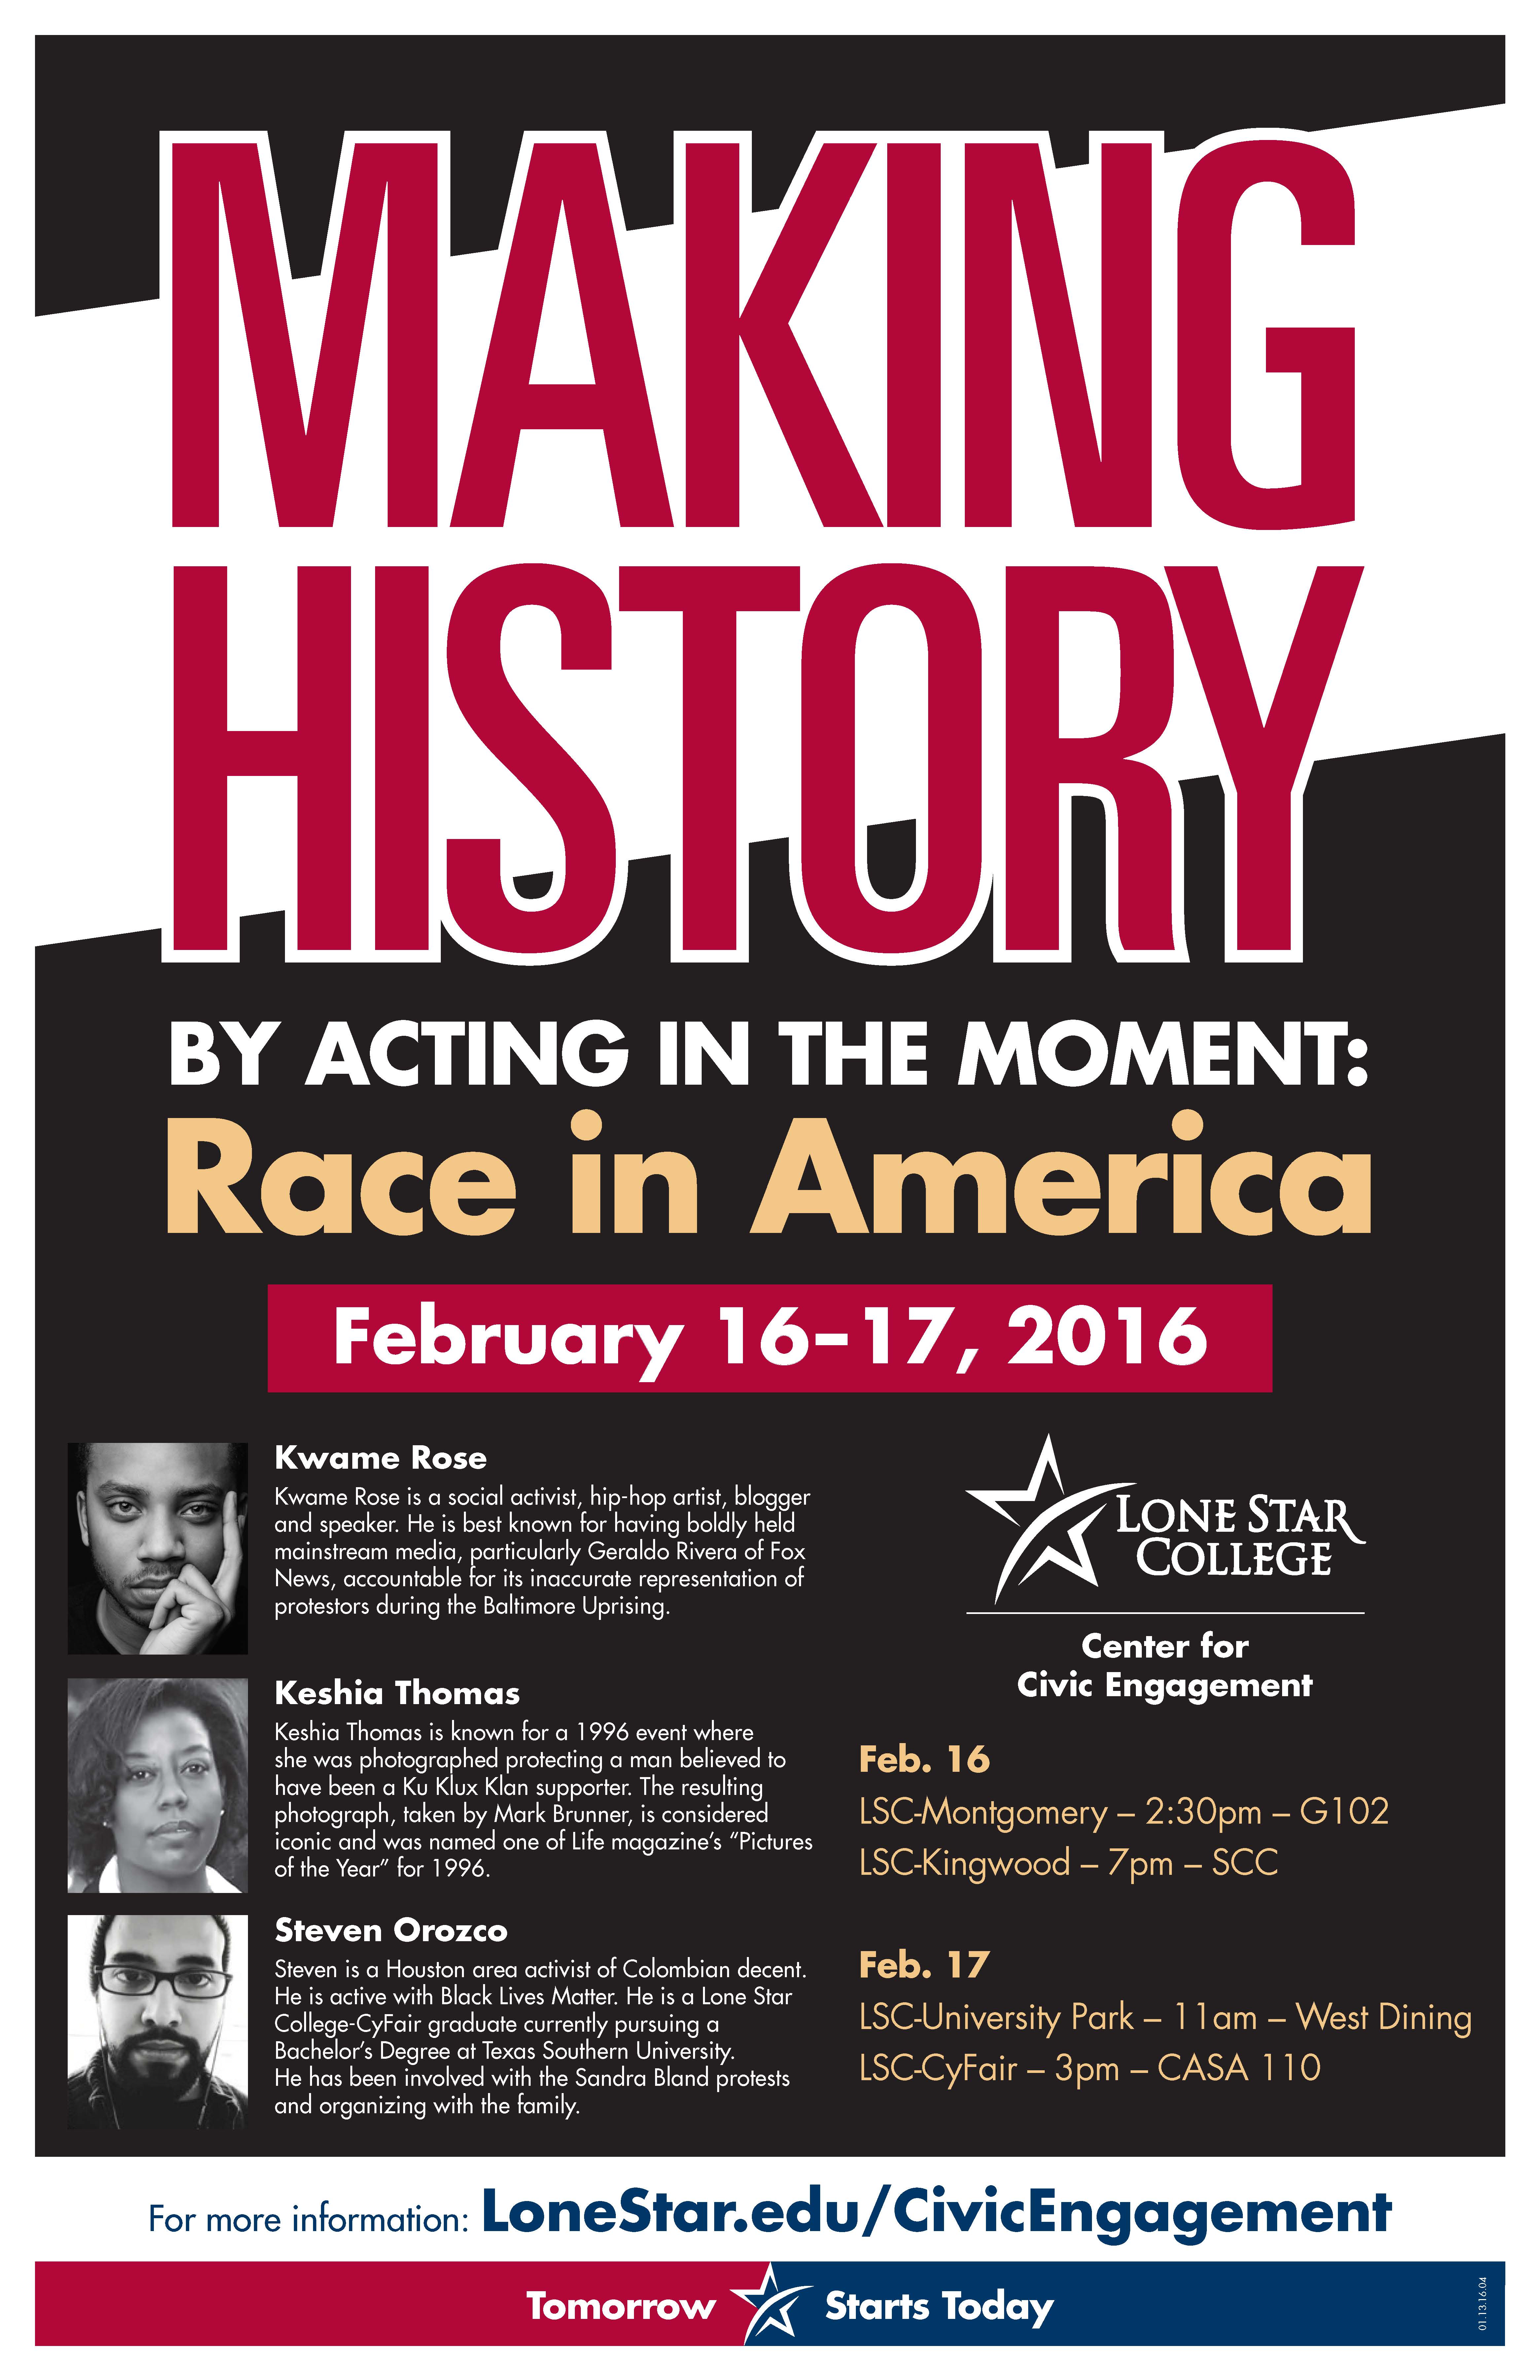 Making history by acting in the moment: Race In America